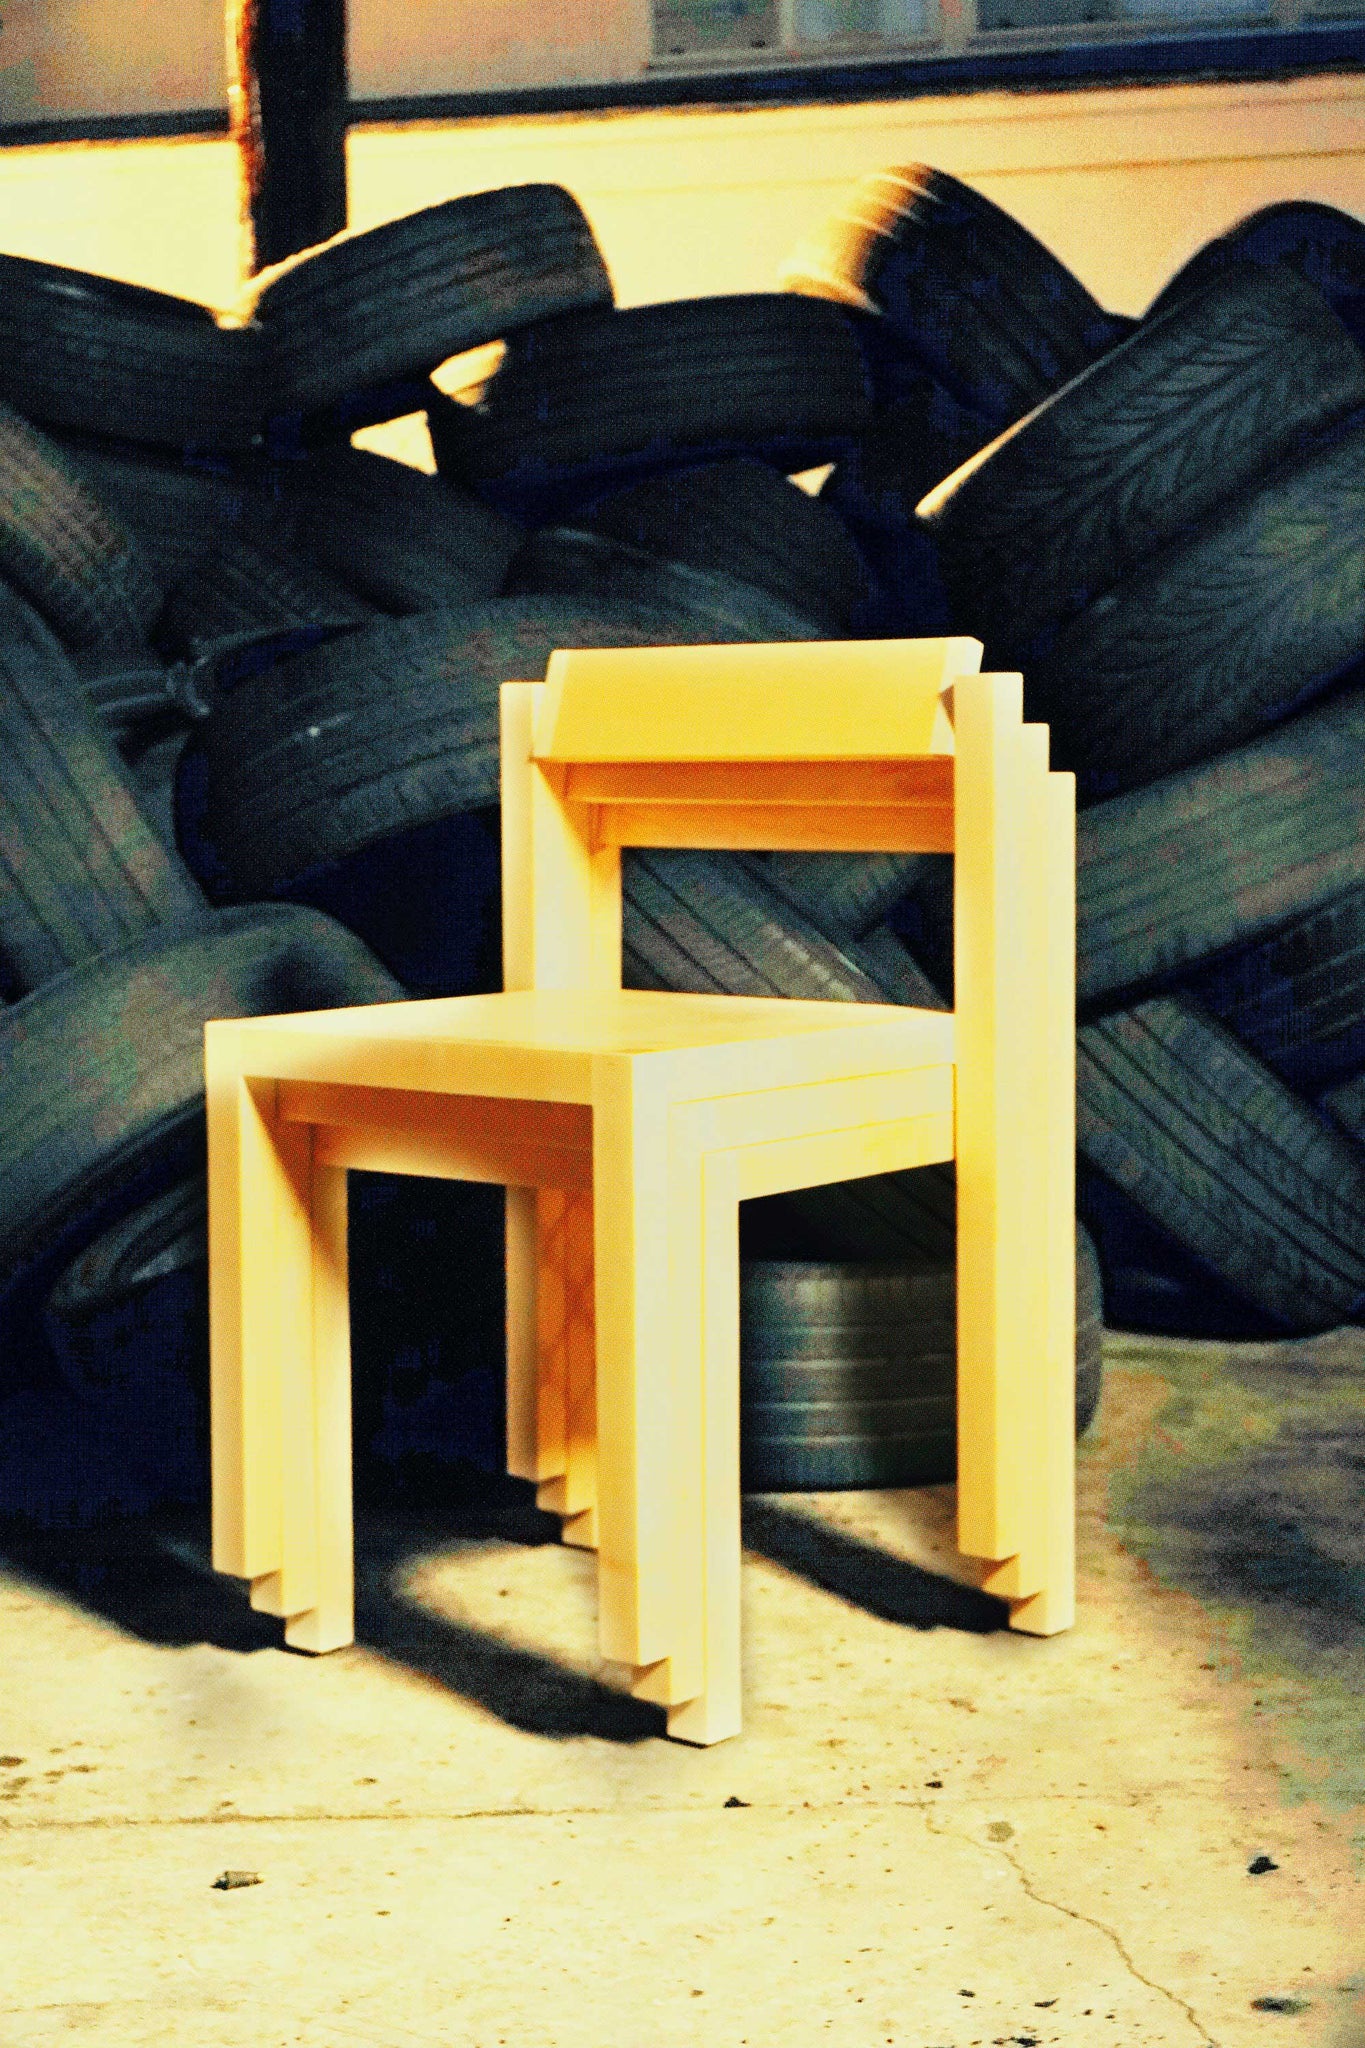 A stack of Anything Chairs shot in front of a pile of tires